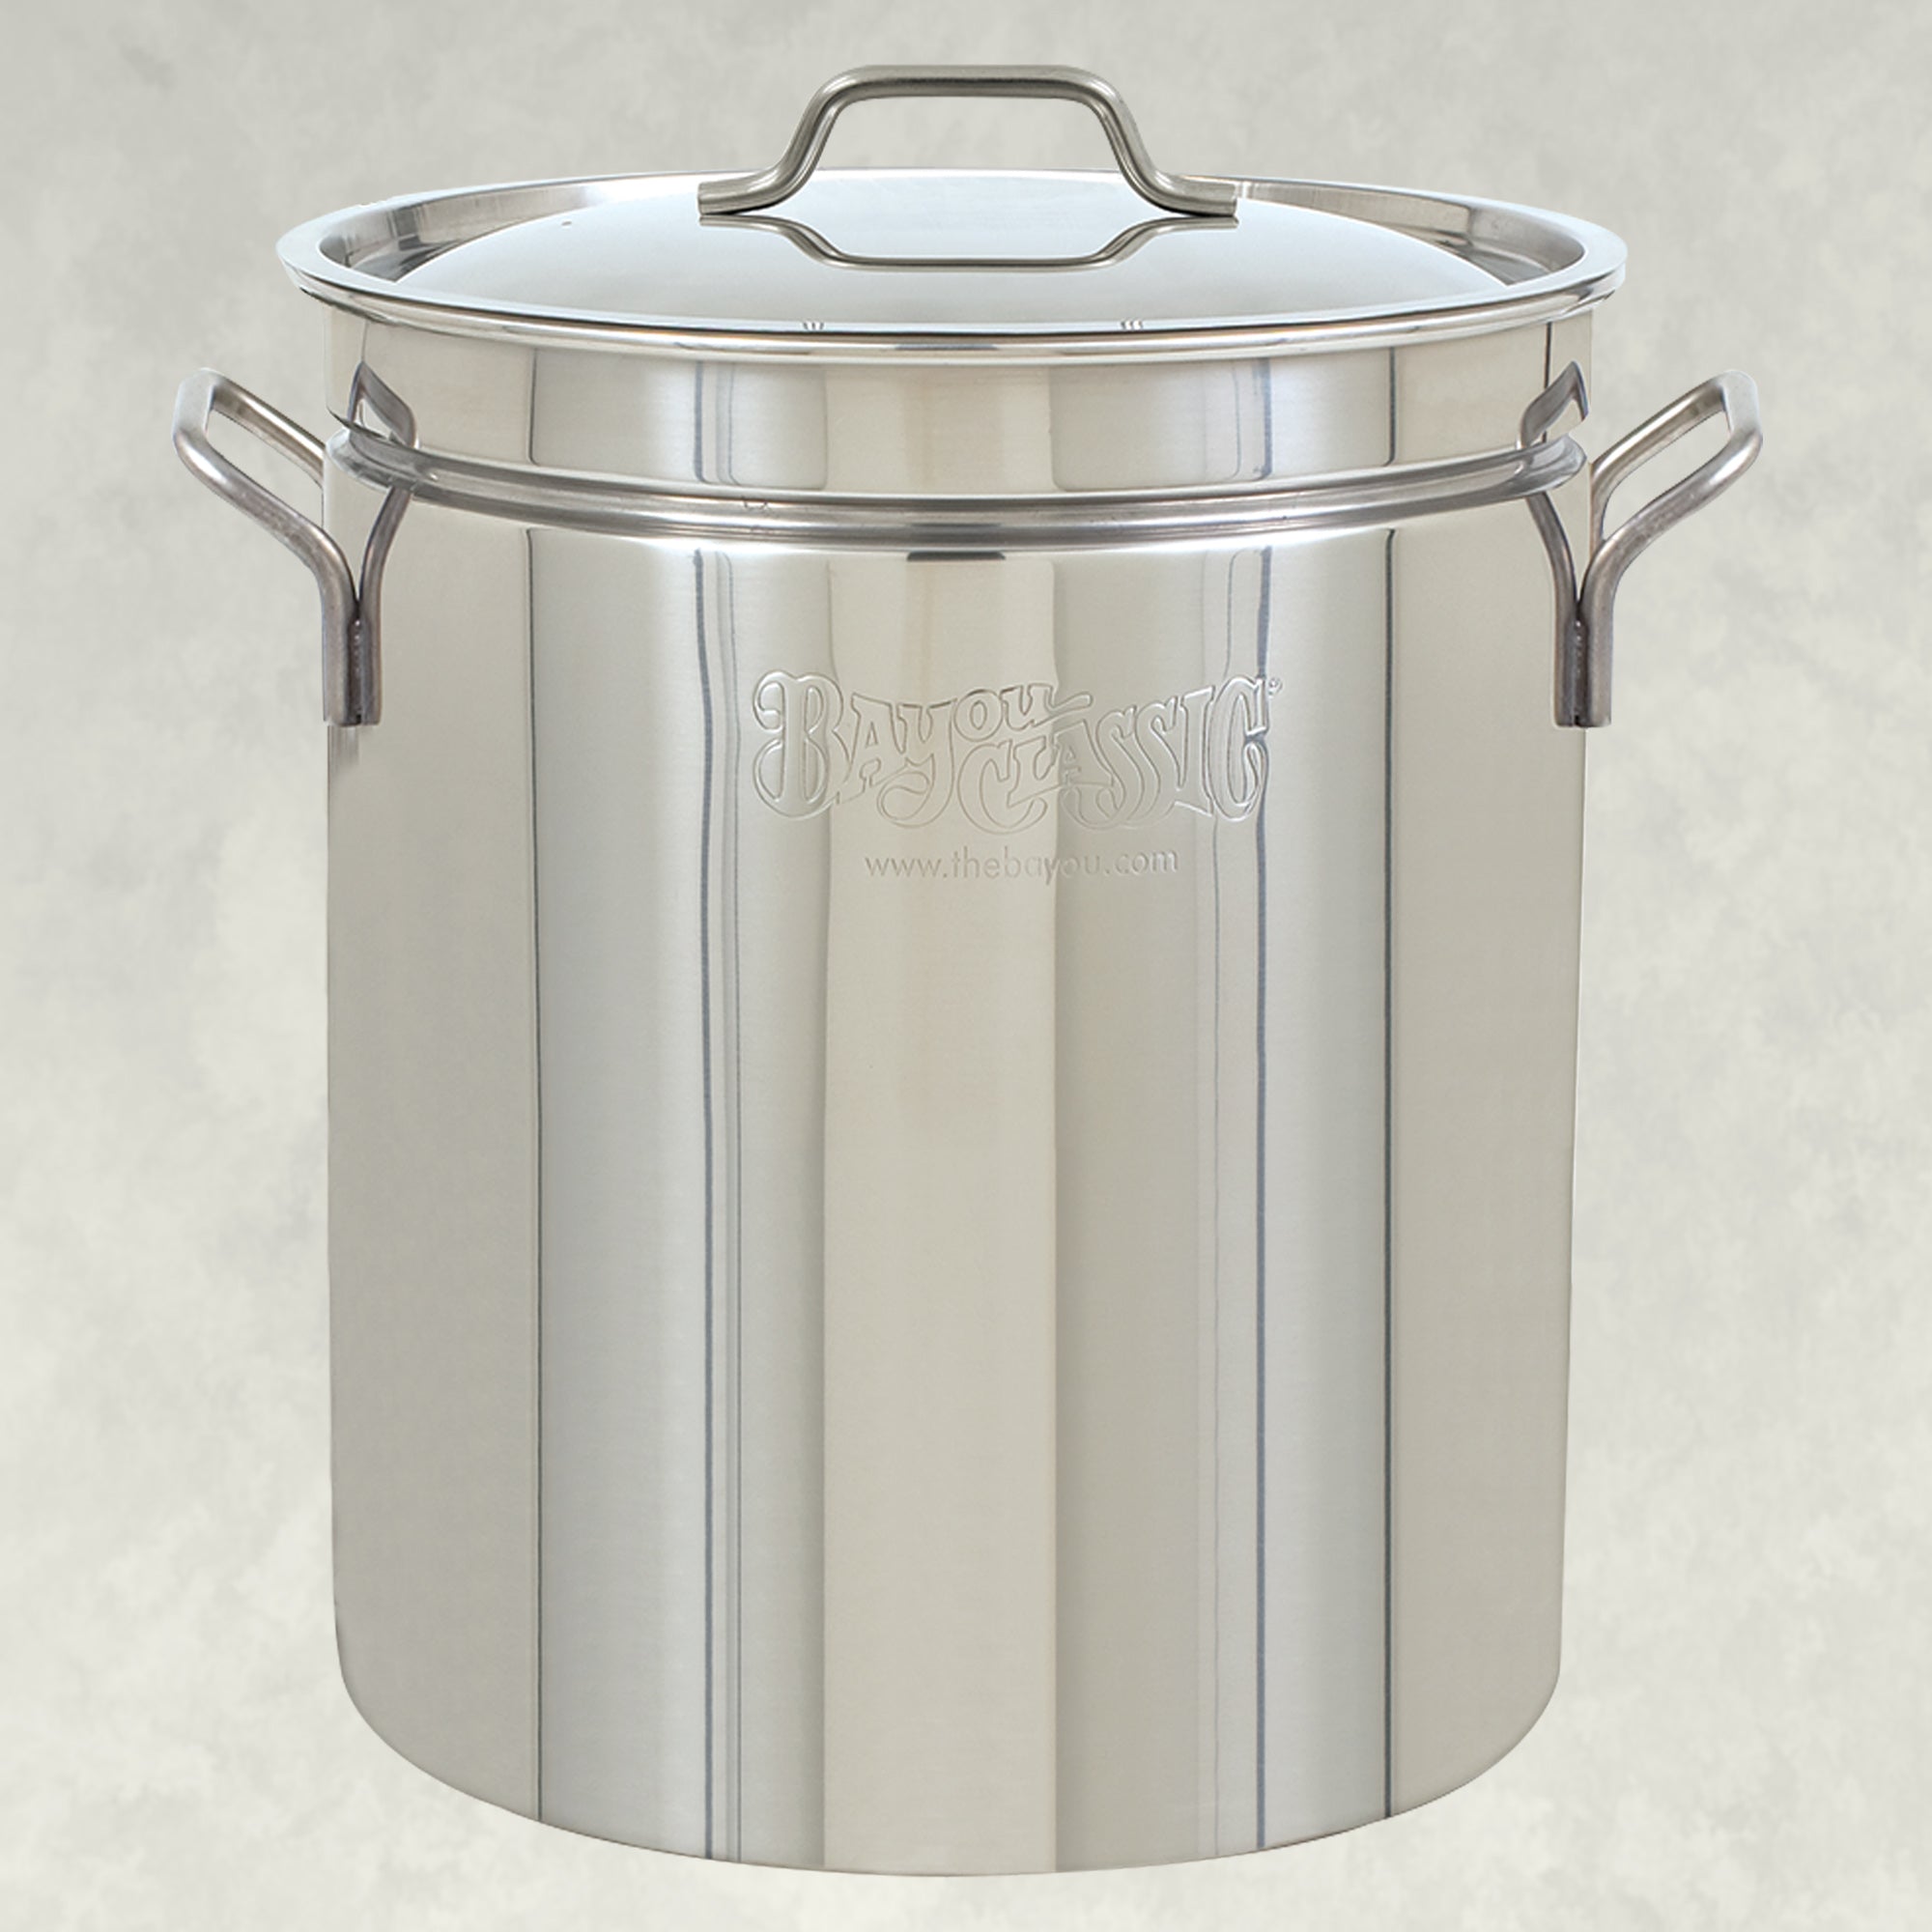 Elegant Large Steel Stock Pot with Lid Cookware Kitchen Cooking 12-Quart